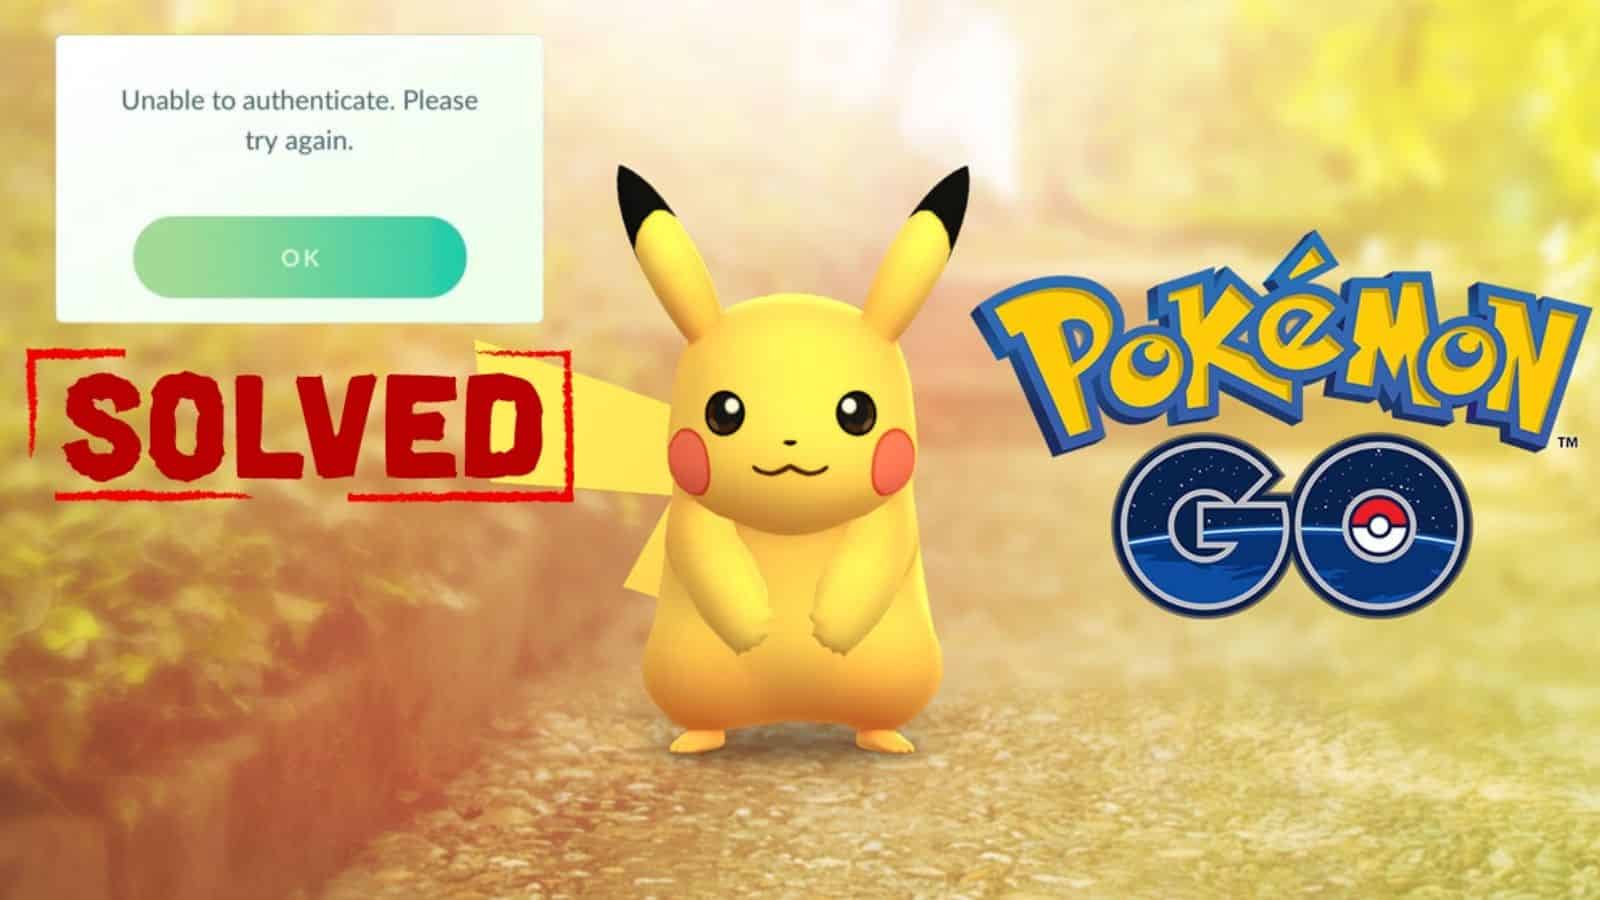 pokemon go unable to authenticate error solved with pikachu thumbnail